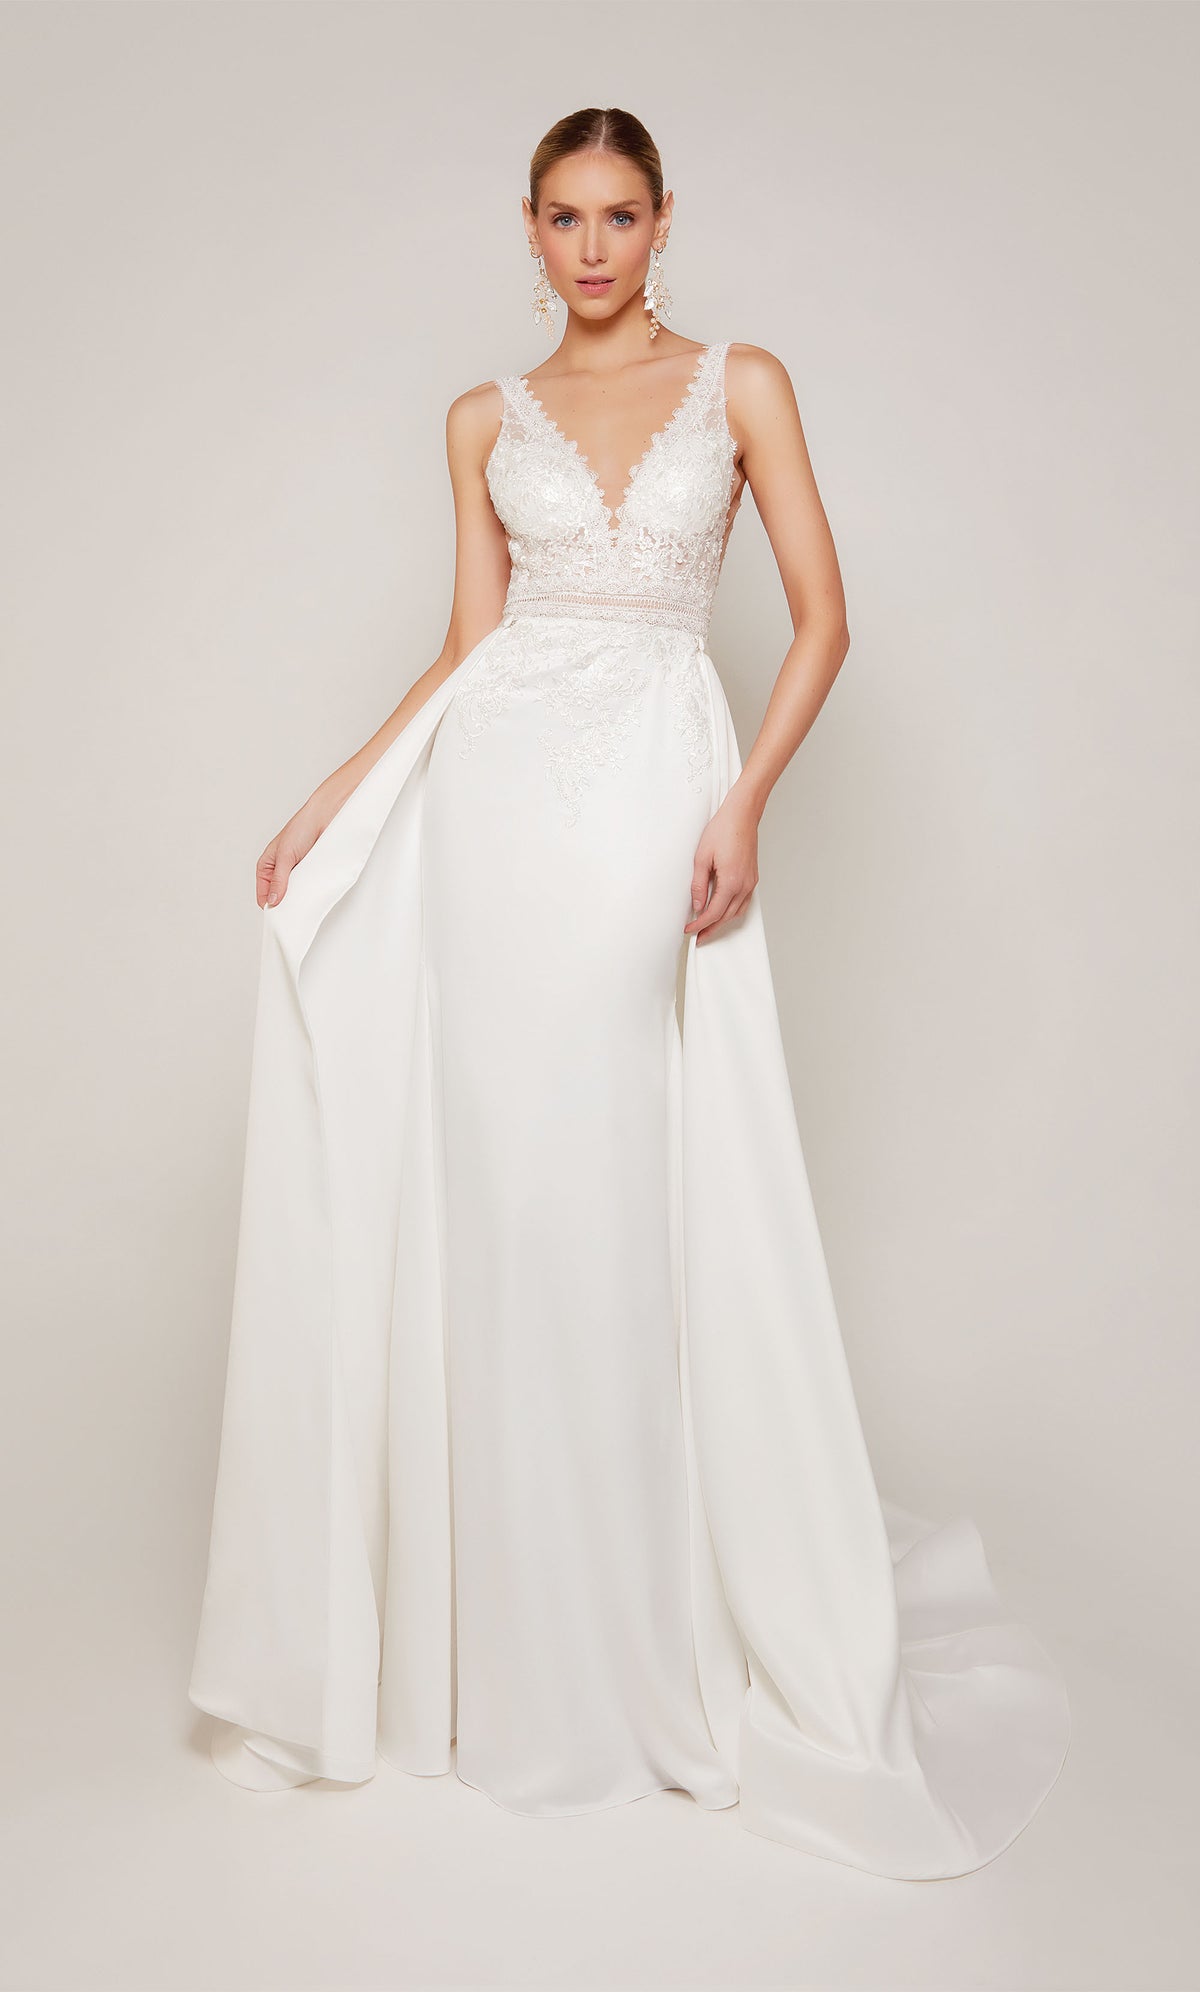 Luxurious satin sheath wedding dress in white with a V-neckline and delicate lace details. The dress comes with a detachable train that adds a hint of drama and formality during the ceremony, and can be detached for a more understated reception style.